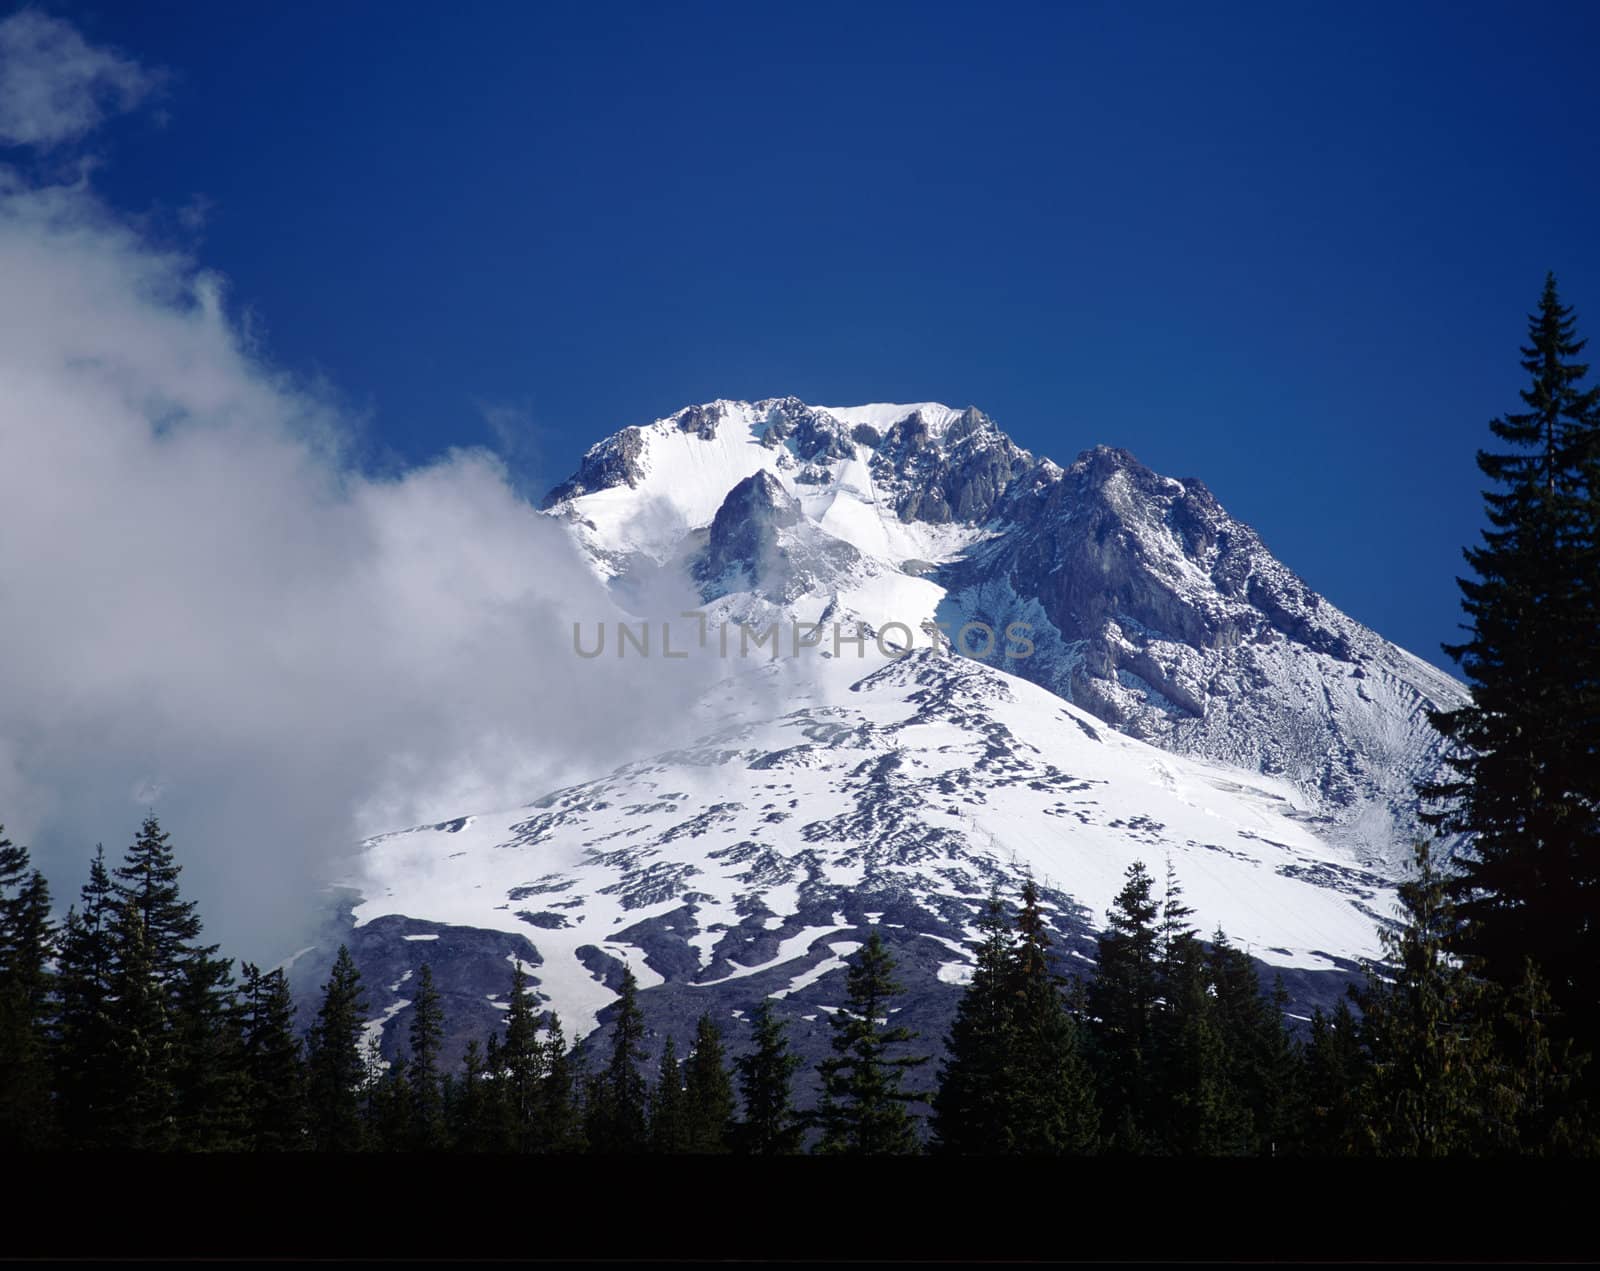 Majestic snowy mountain peak in Oregon surrounded by green pine tree forest